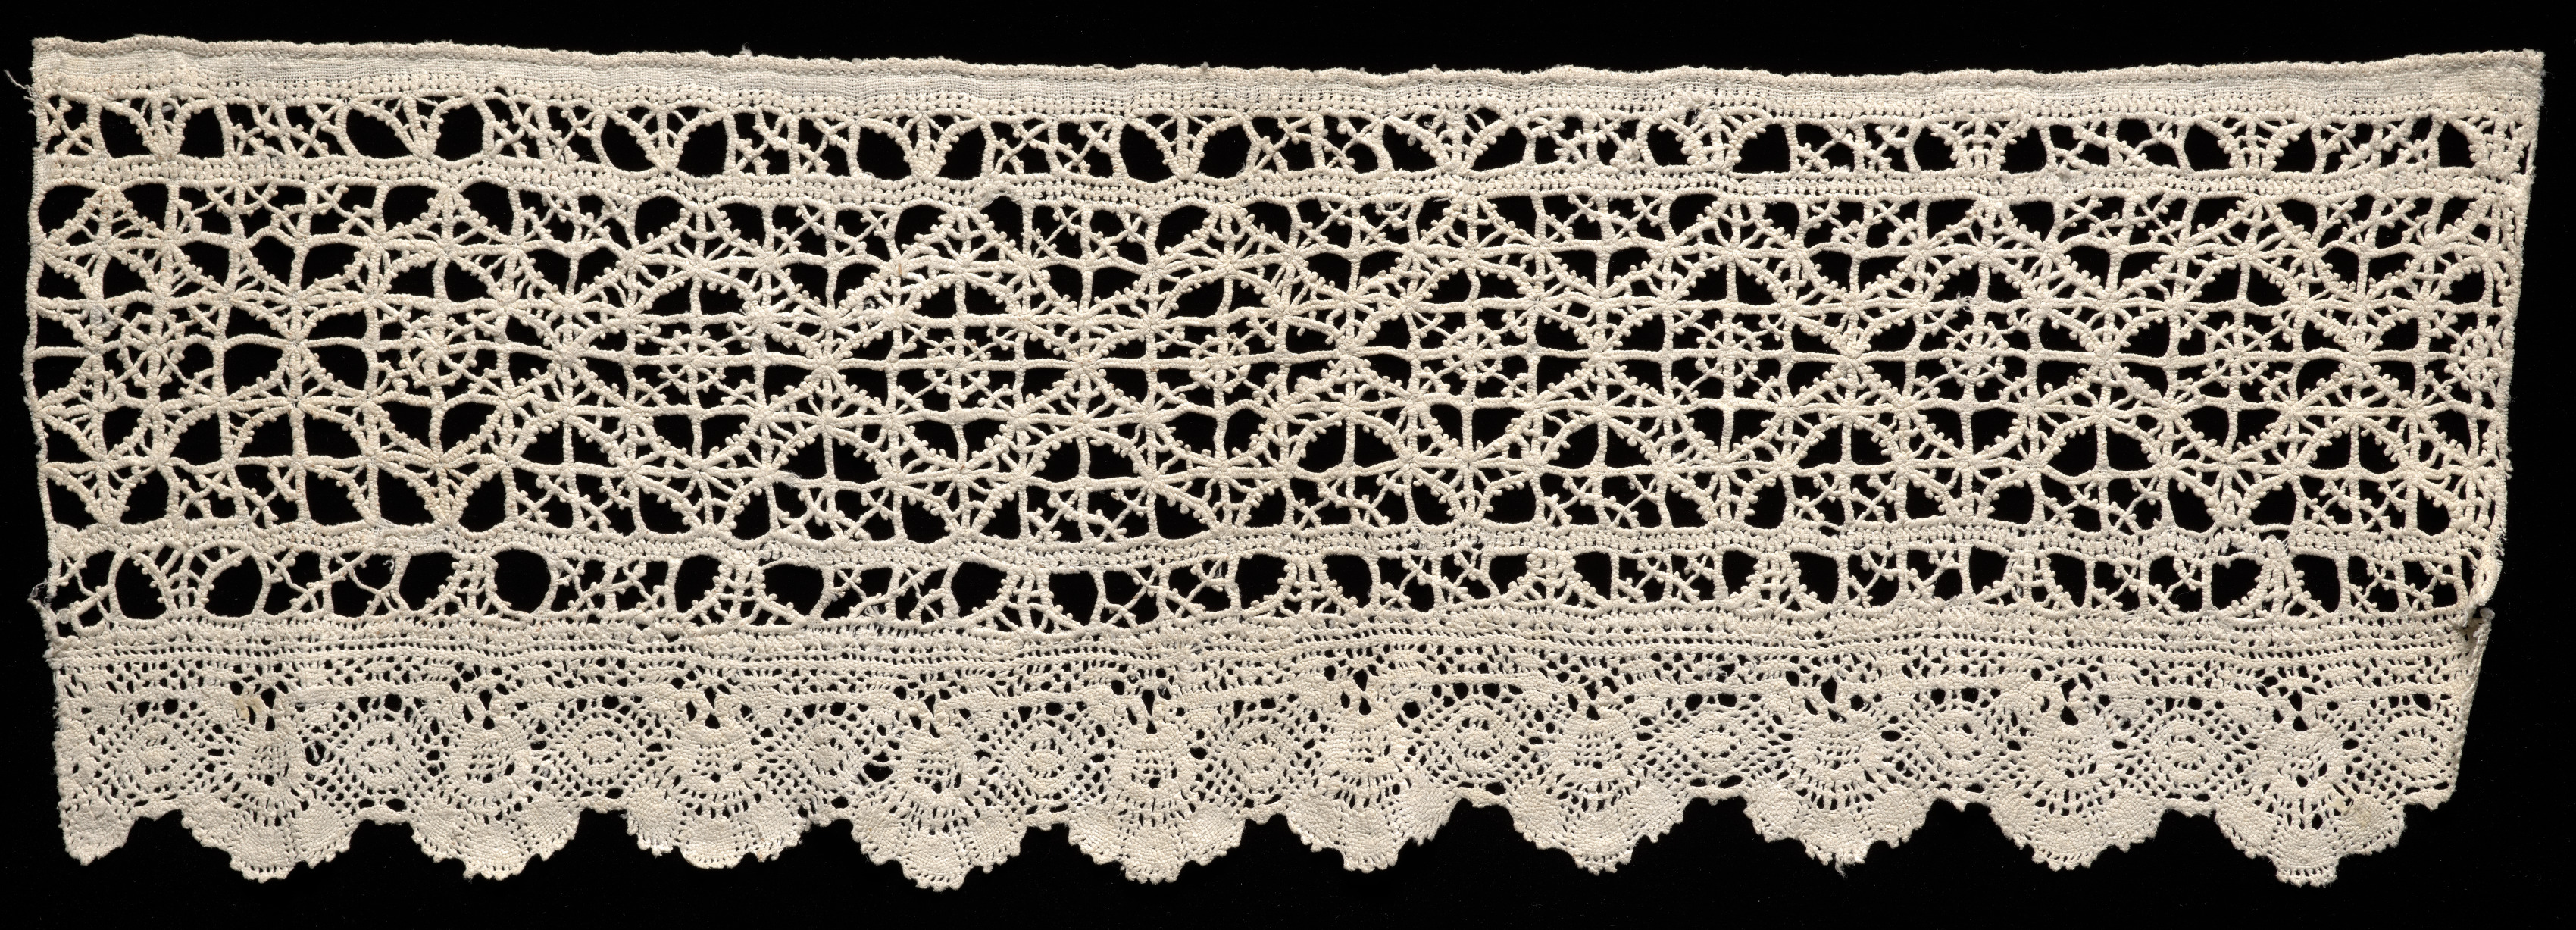 Needlepoint (Reticella) and Bobbin Lace Band